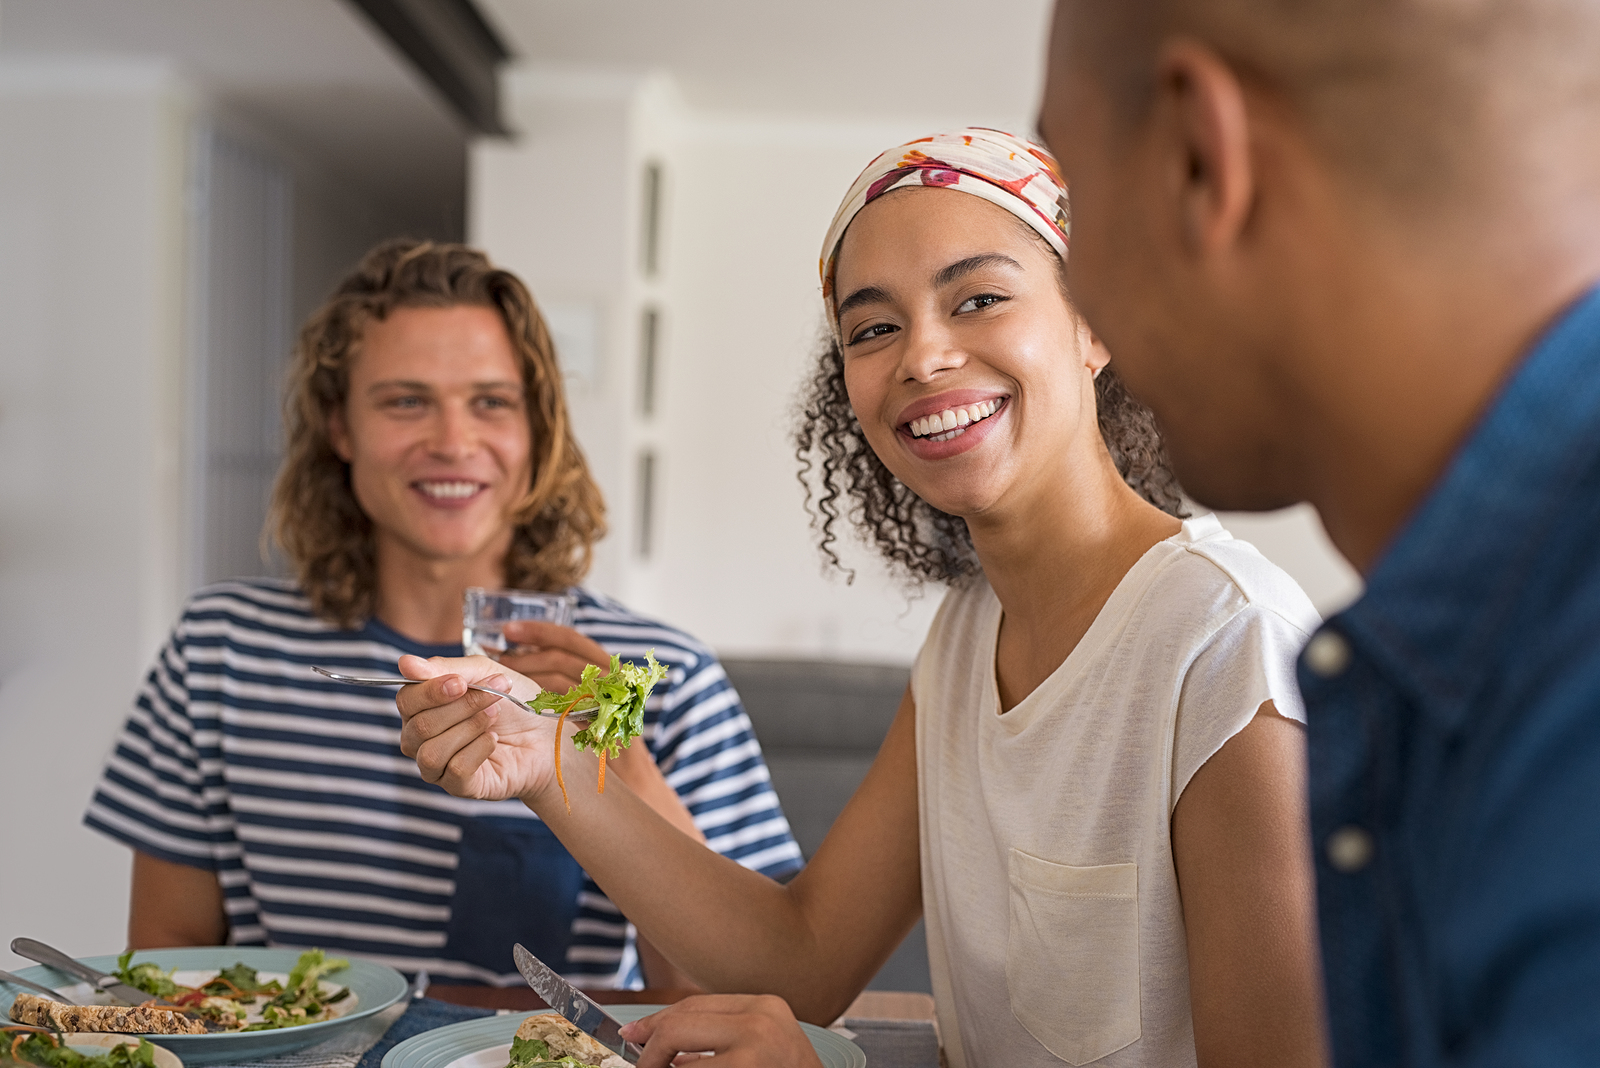 Beautiful african woman eating fresh salad with friends for lunch. Happy cheerful friends in a conversation during lunch at home. Young friends meeting each other for healthy meal.